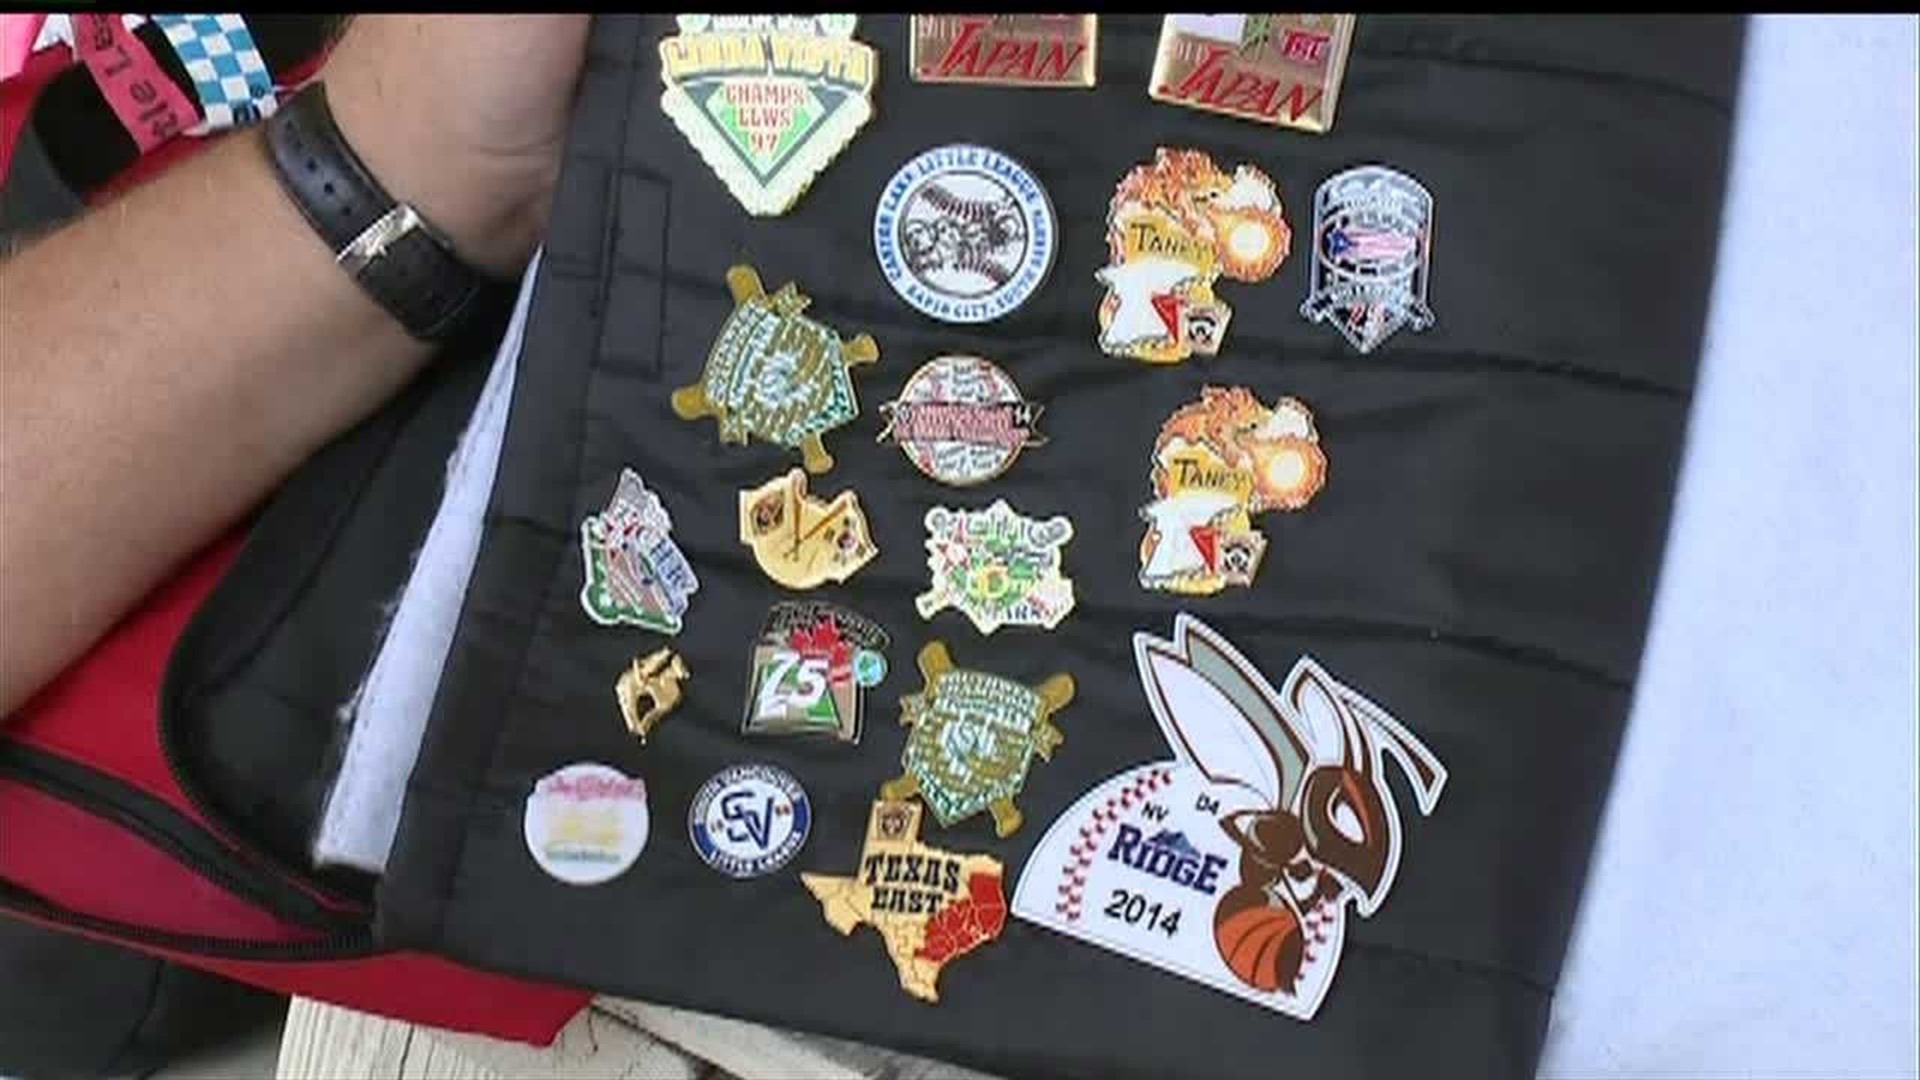 Pin Trading at the Little League World Series